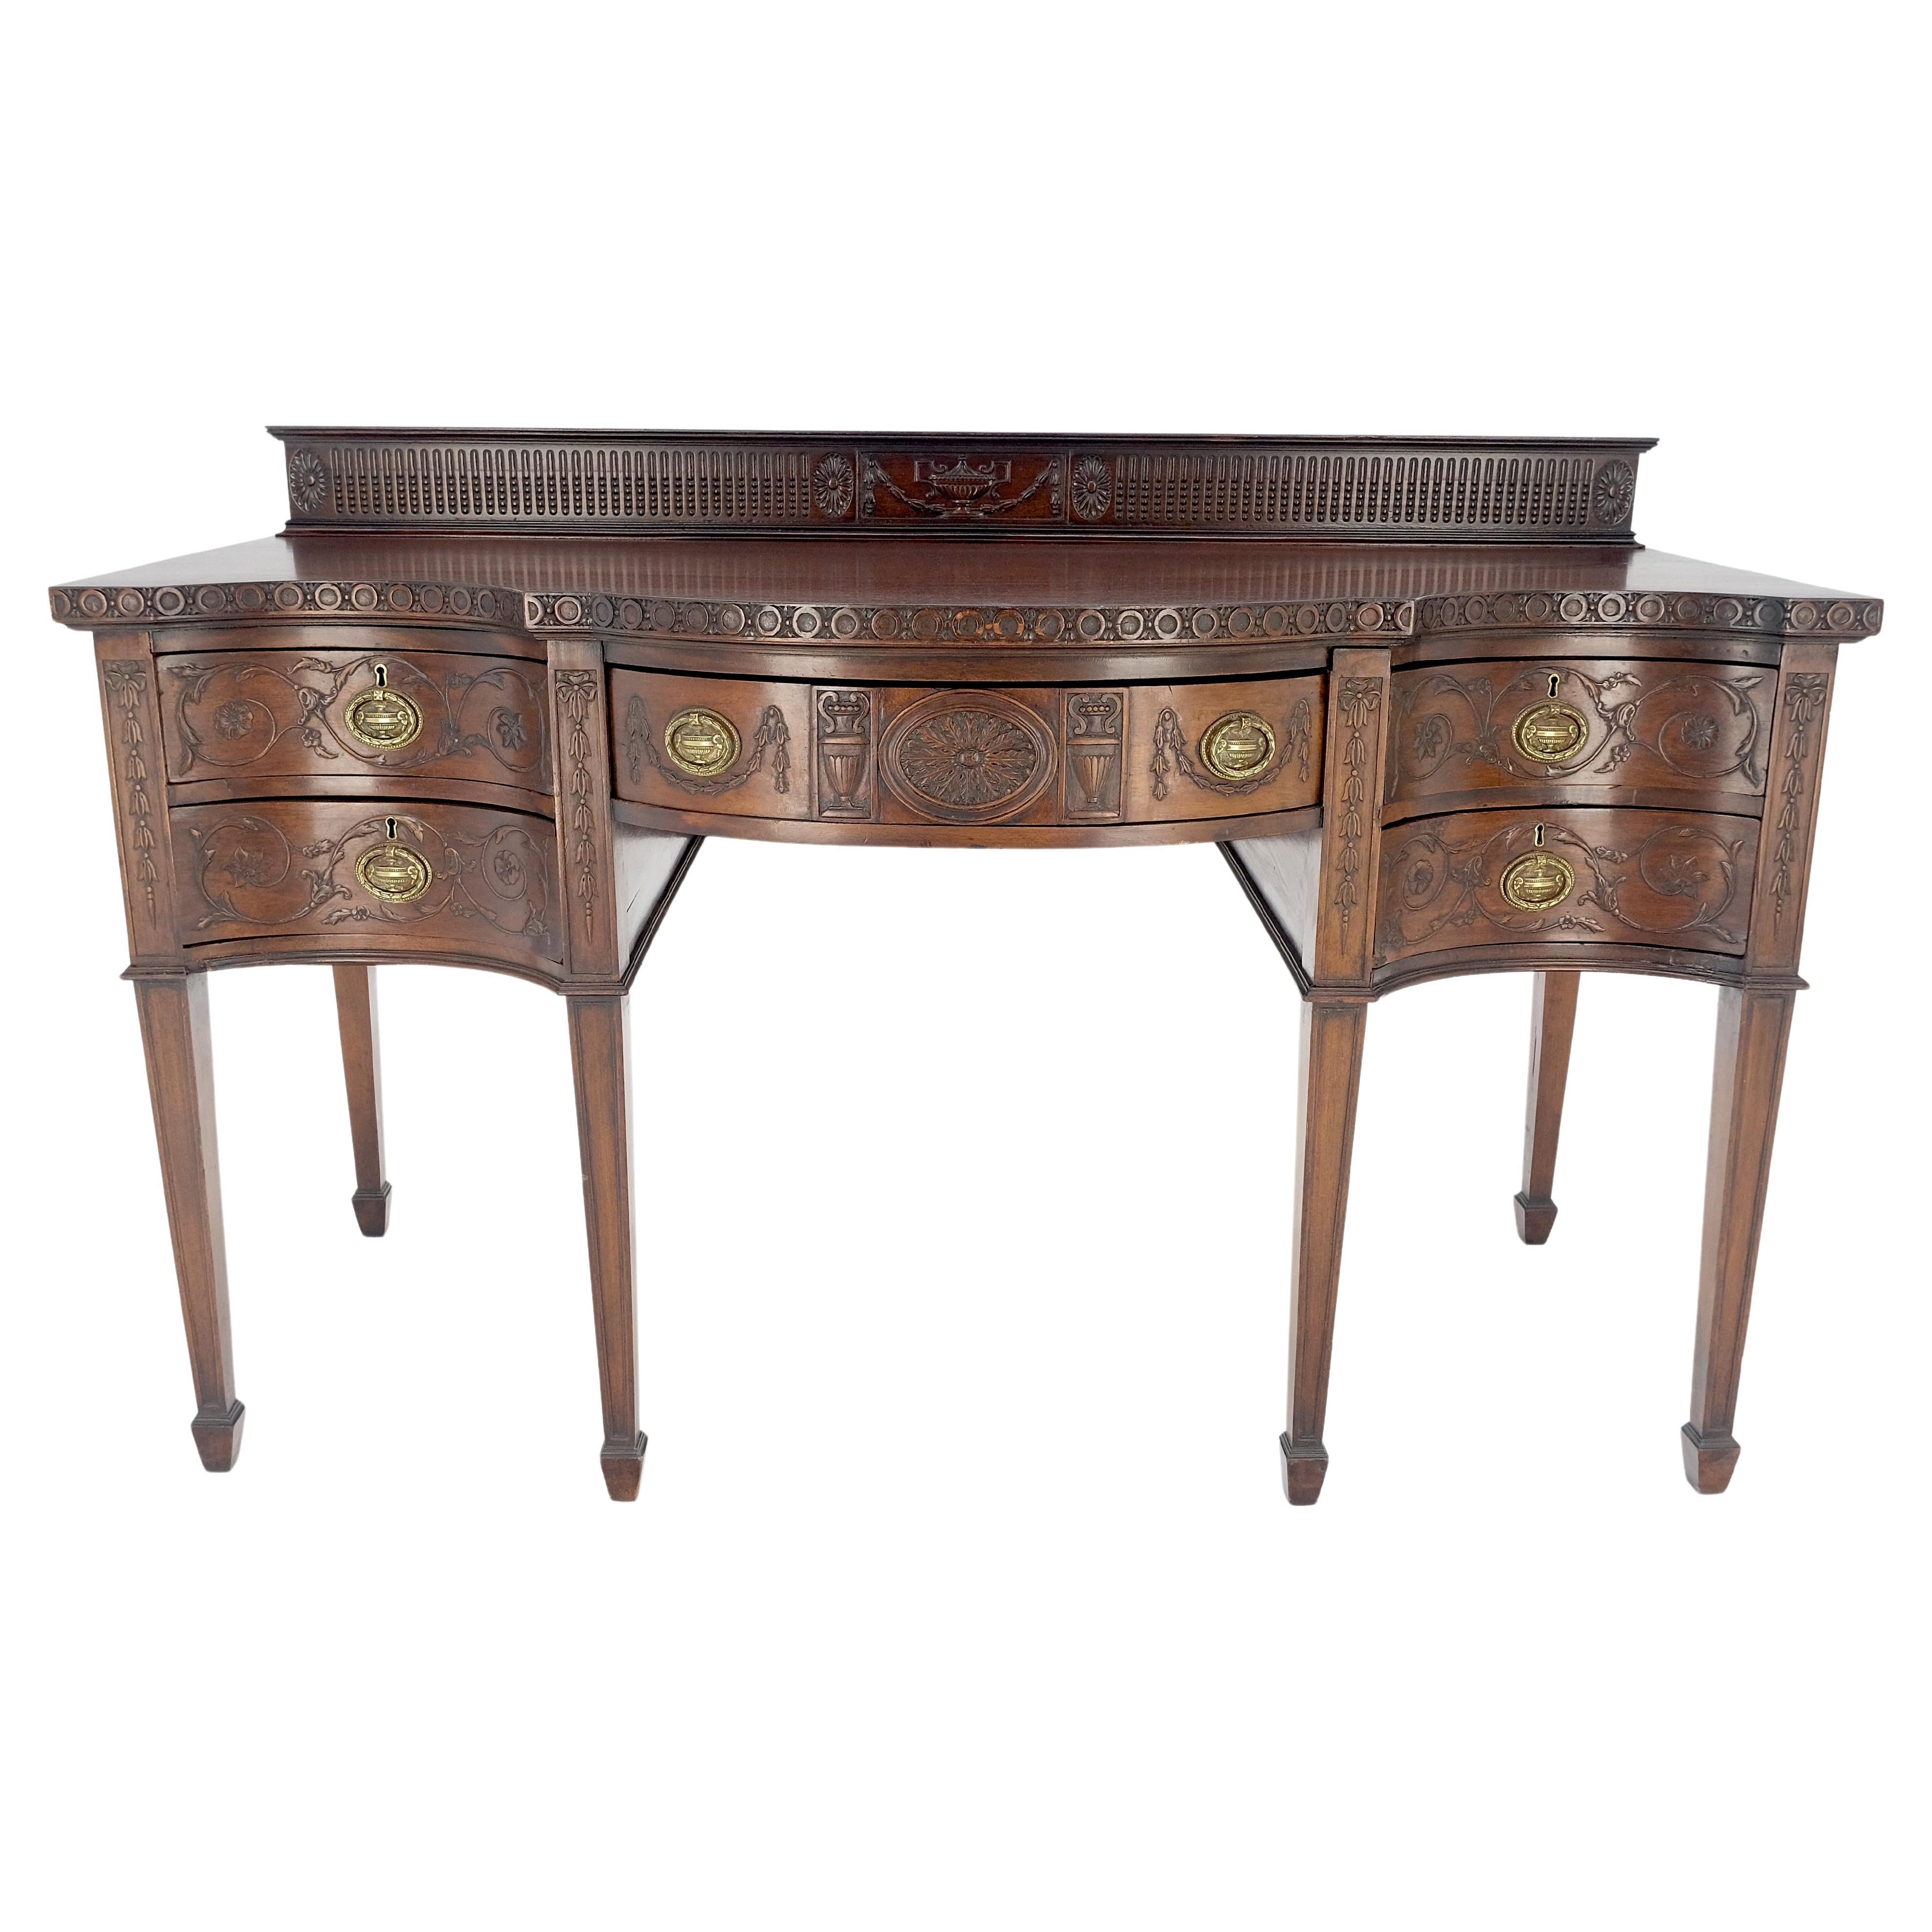 Fine Bench Made Carved Mahogany Serpentine Front  Dovetail Drawers Vanity Desk